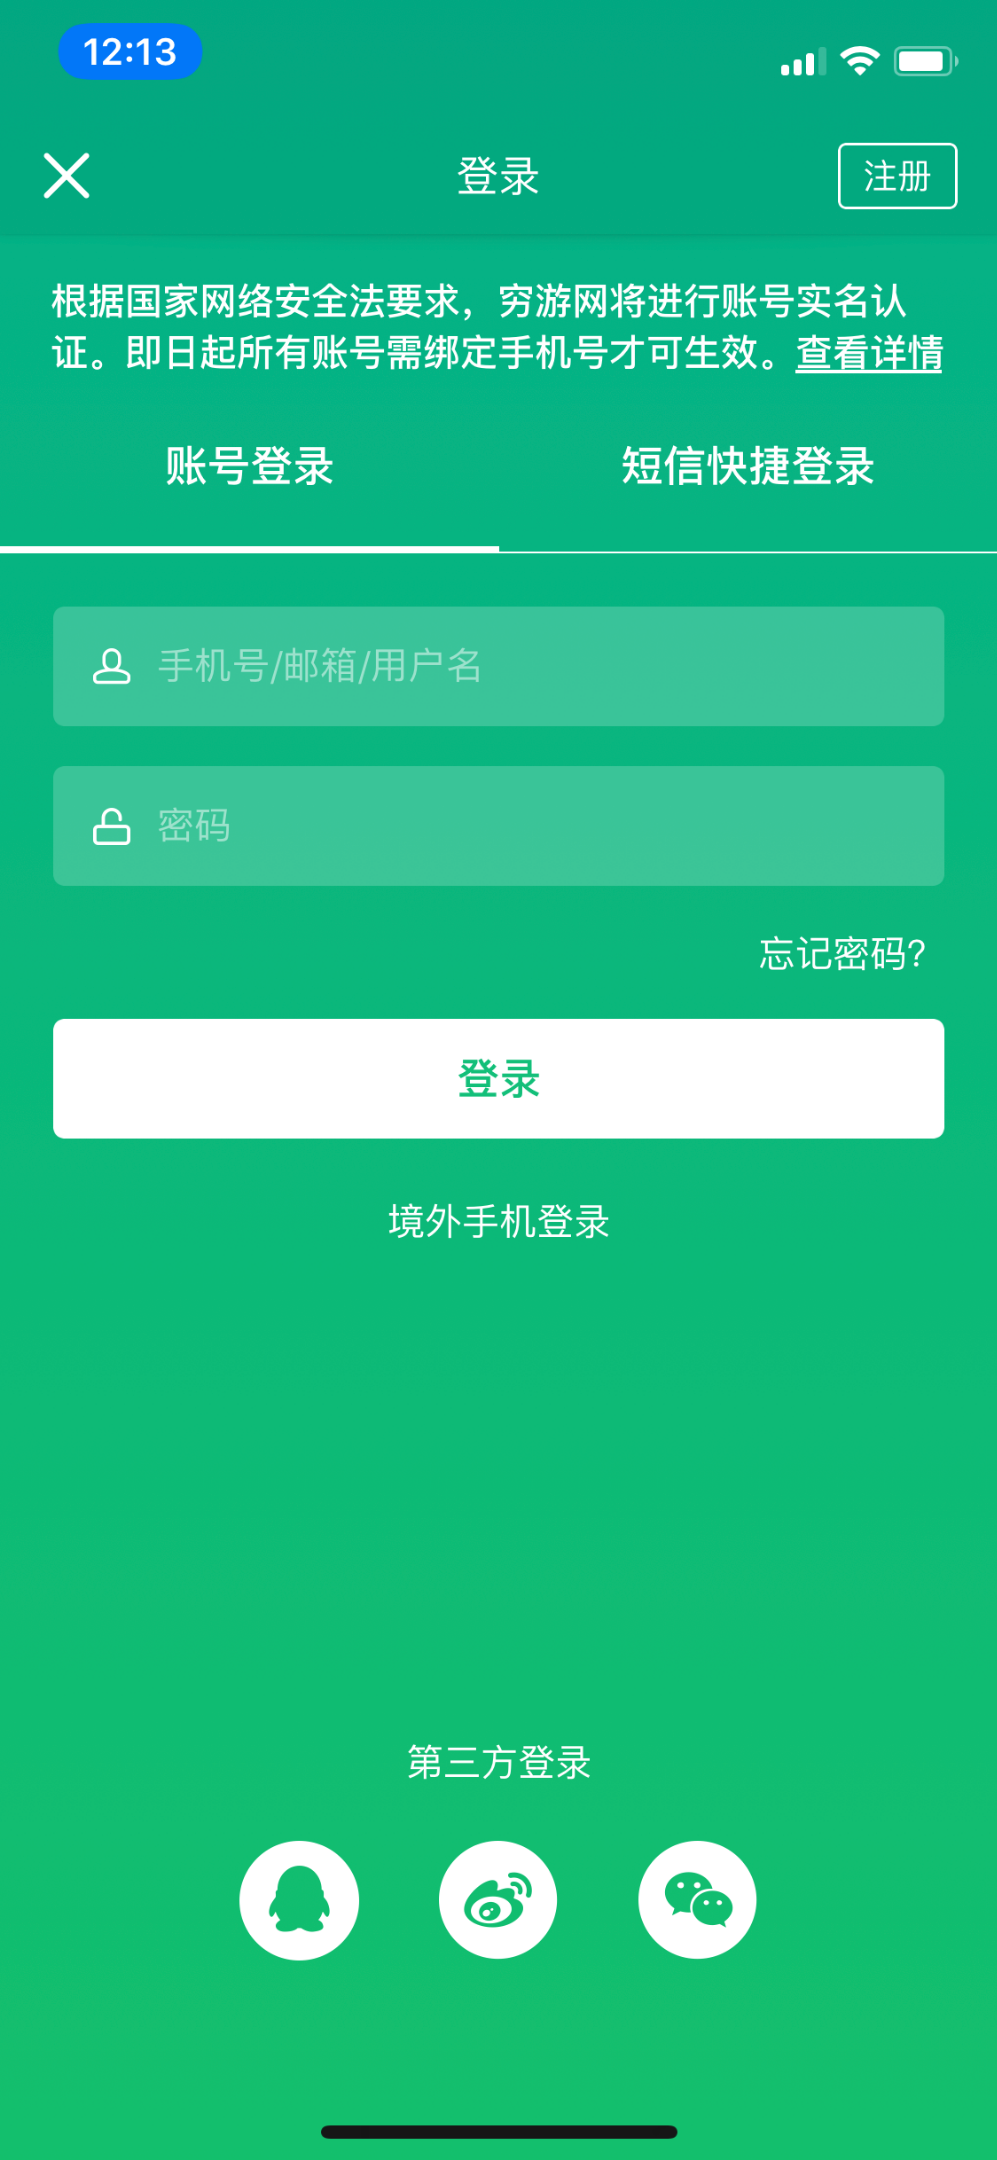 Different landing pages for WeChat authorization